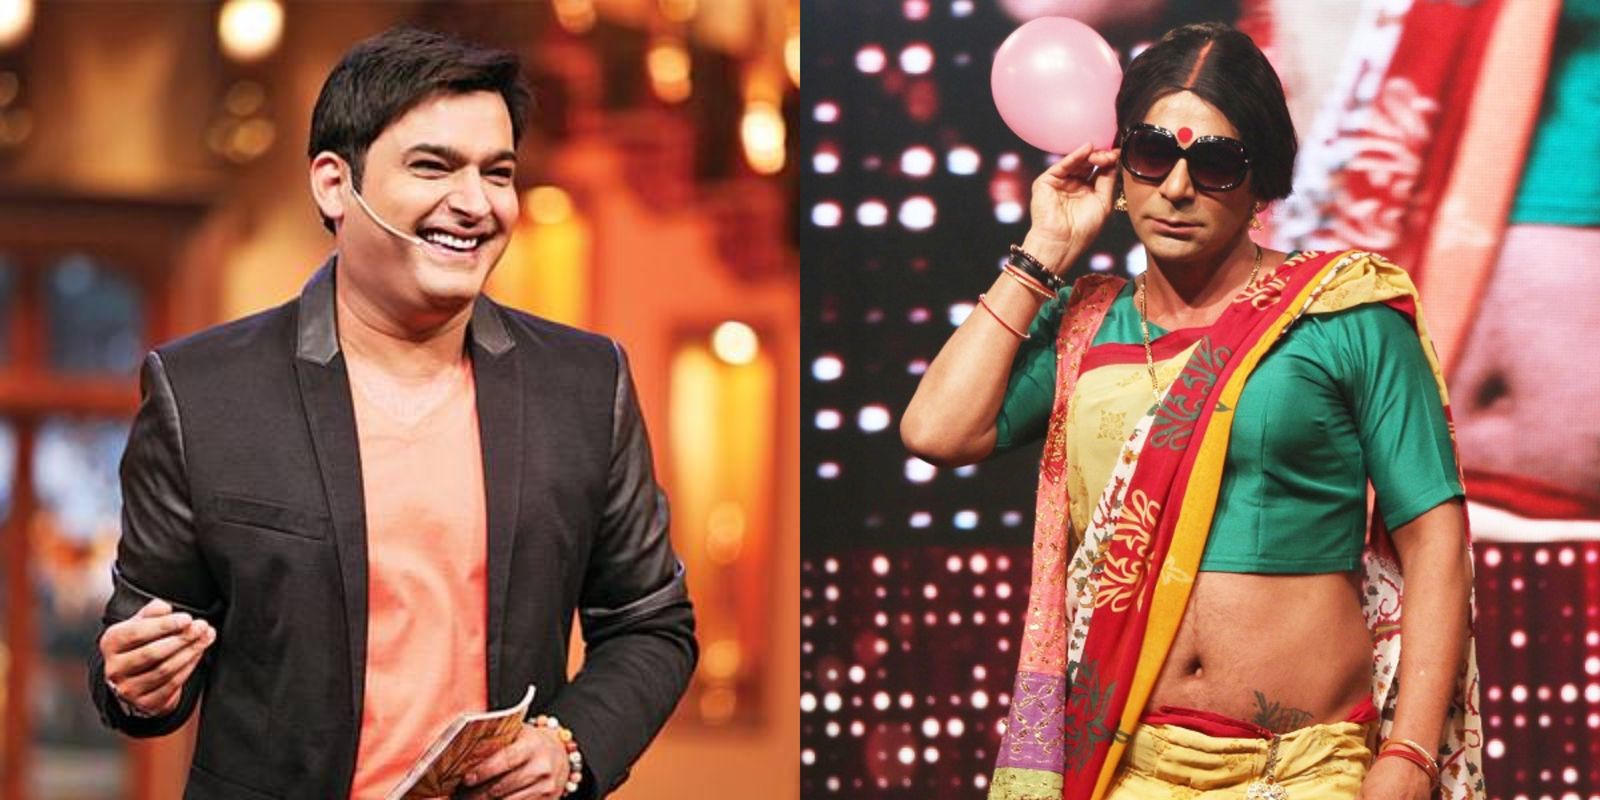 Kapil Sharma Introduces The Real Rinku Bhabhi, The One Who inspired Sunil Grover's Popular Character On The Show